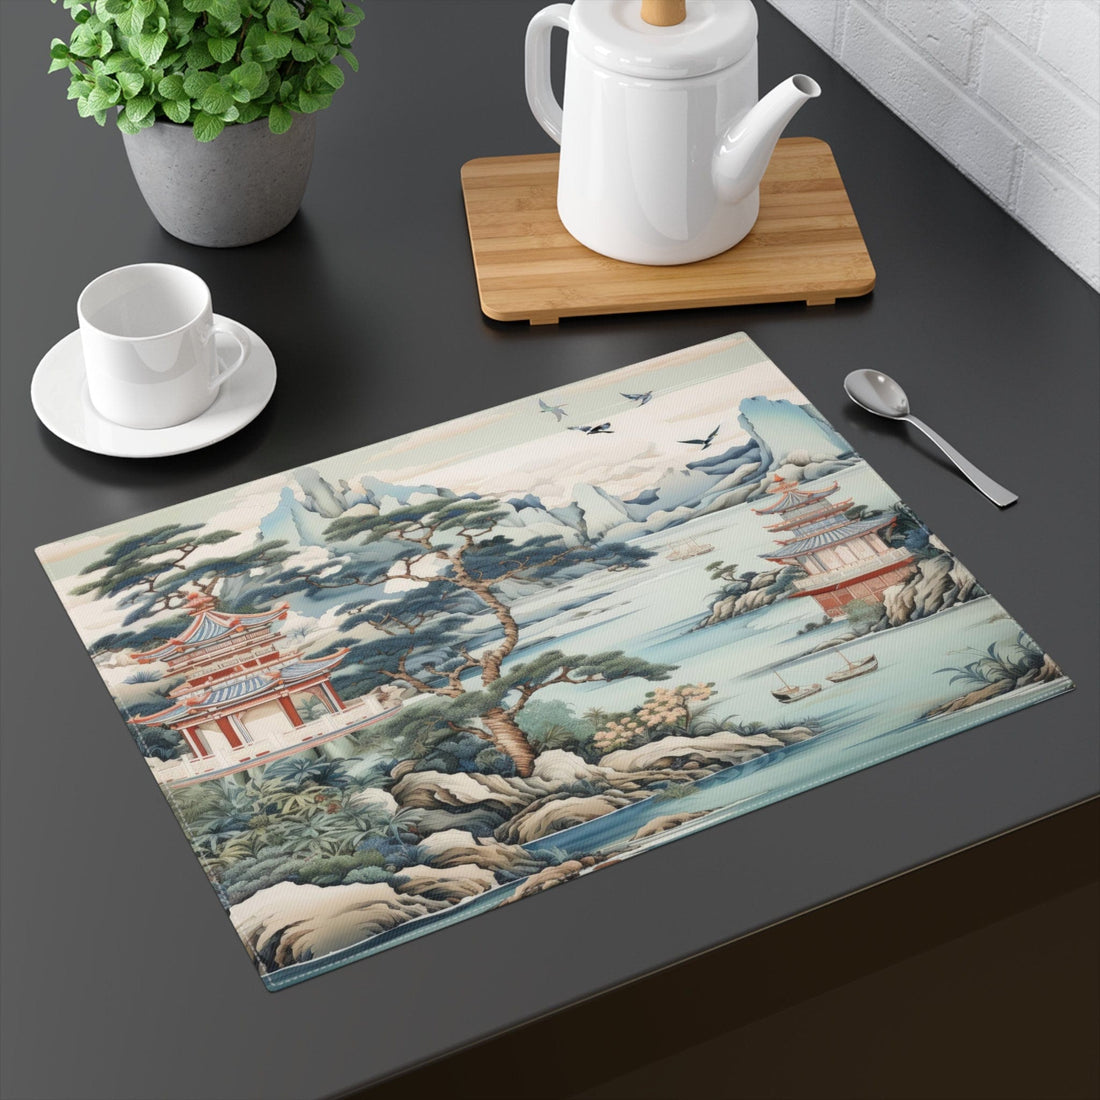 Kate McEnroe New York Chinoiserie Pagoda Landscape Floral Fabric Placemat, Country Farmhouse Table Linen, Wedding Table Decor, Grandmillenial Kitchen - 121681023Placemats24445572810059951433